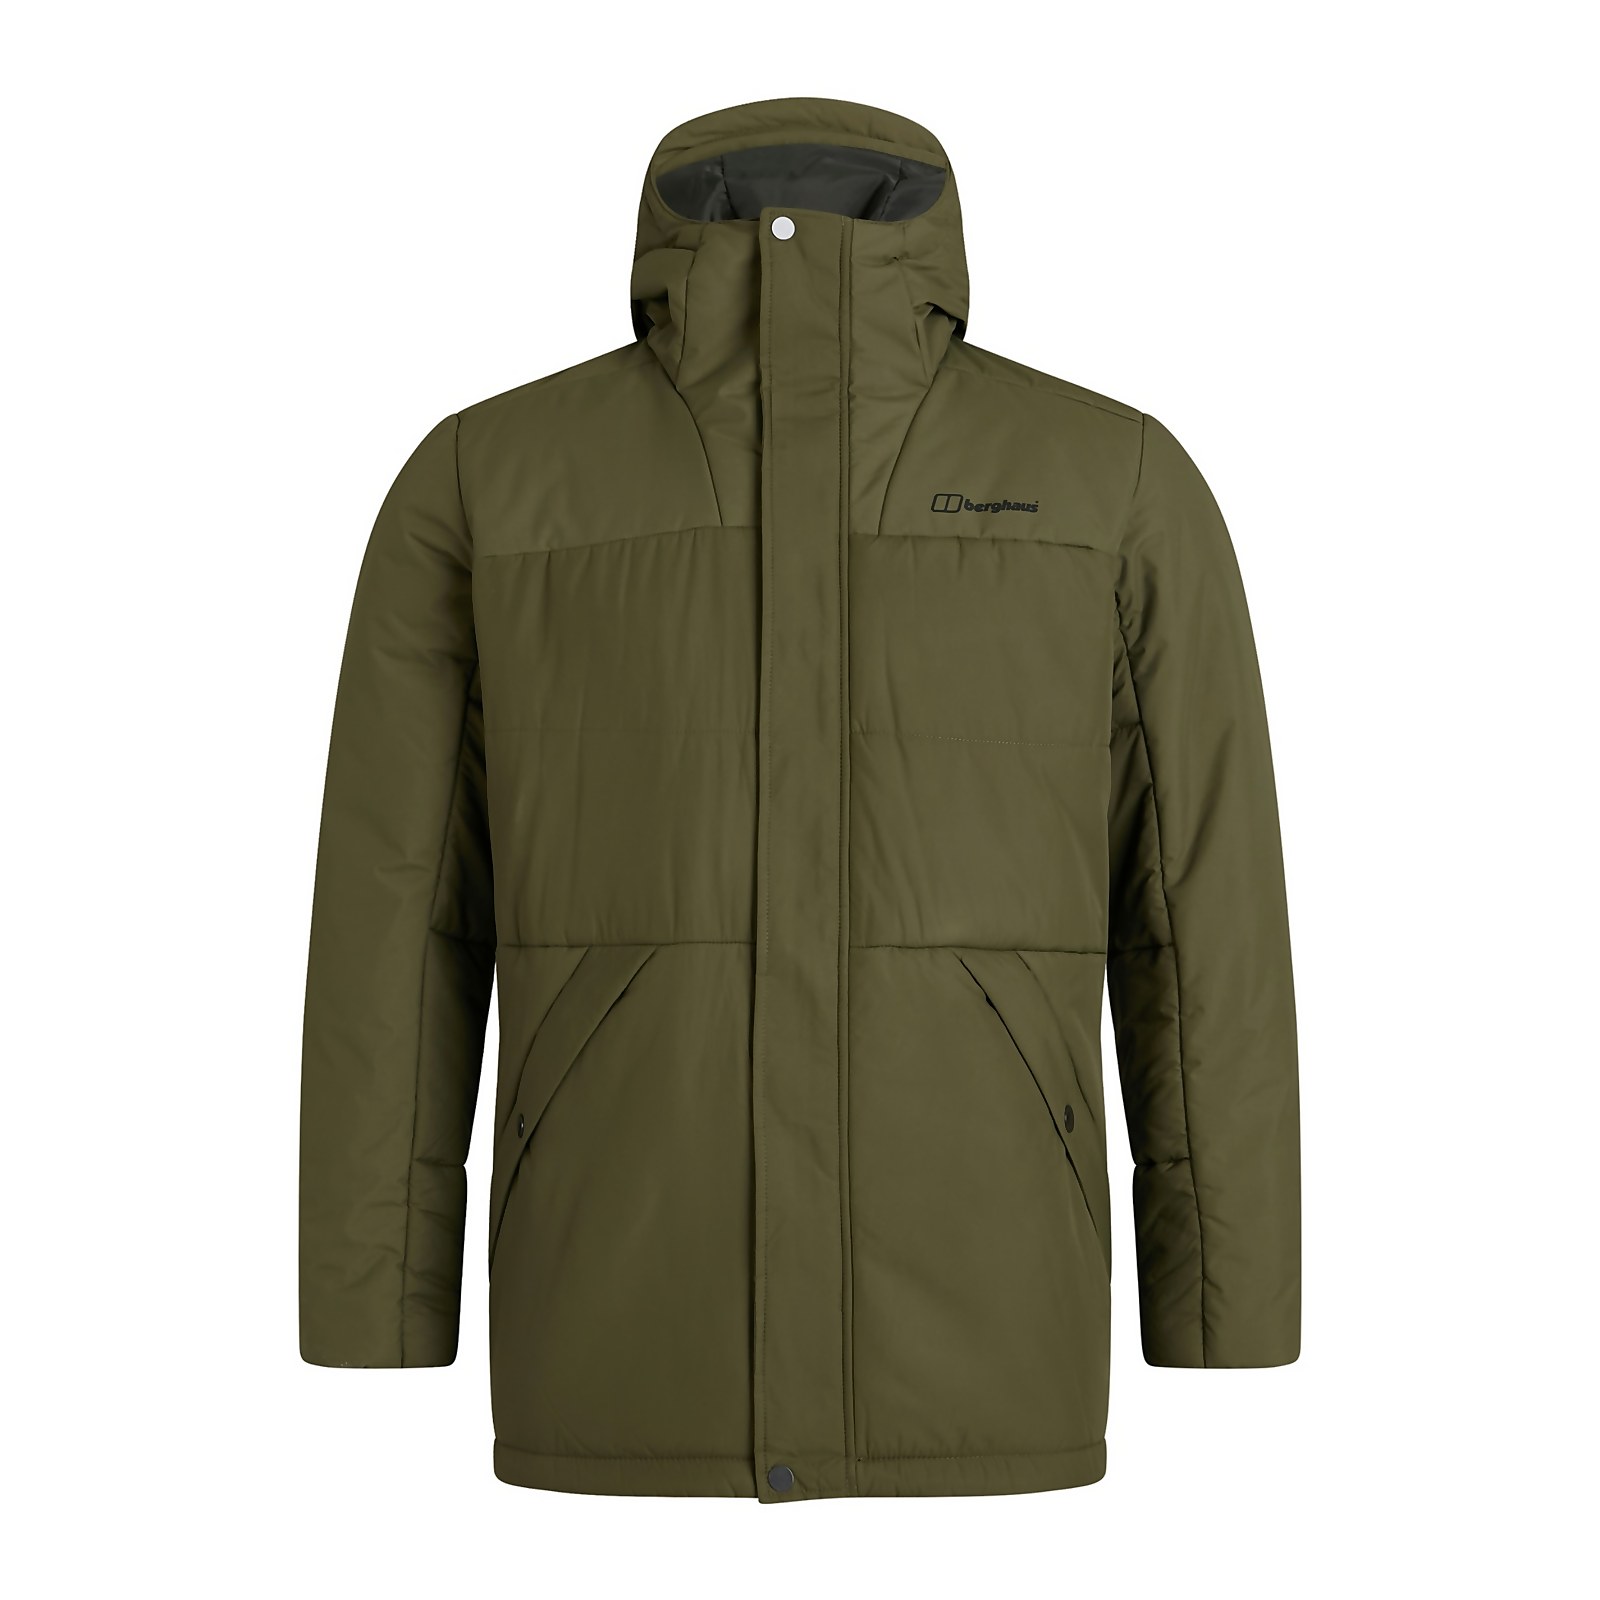 Berghaus Mens Pole 21 Insulated Jacket - Green